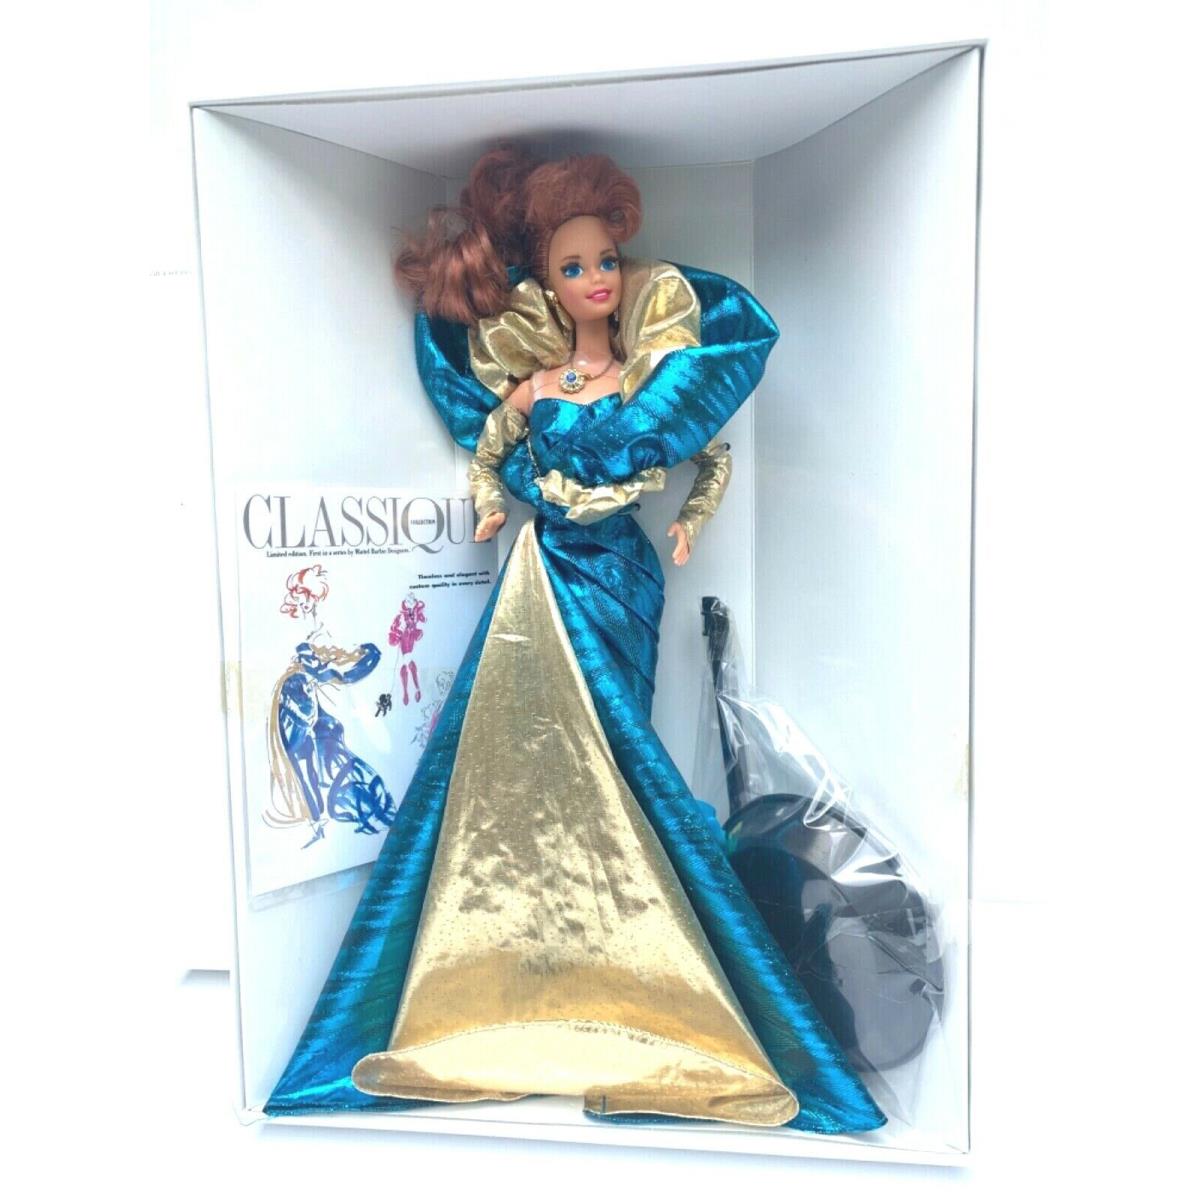 Mattel Benefit Ball Barbie Doll First In The Series Of Exclusive Limited Edition